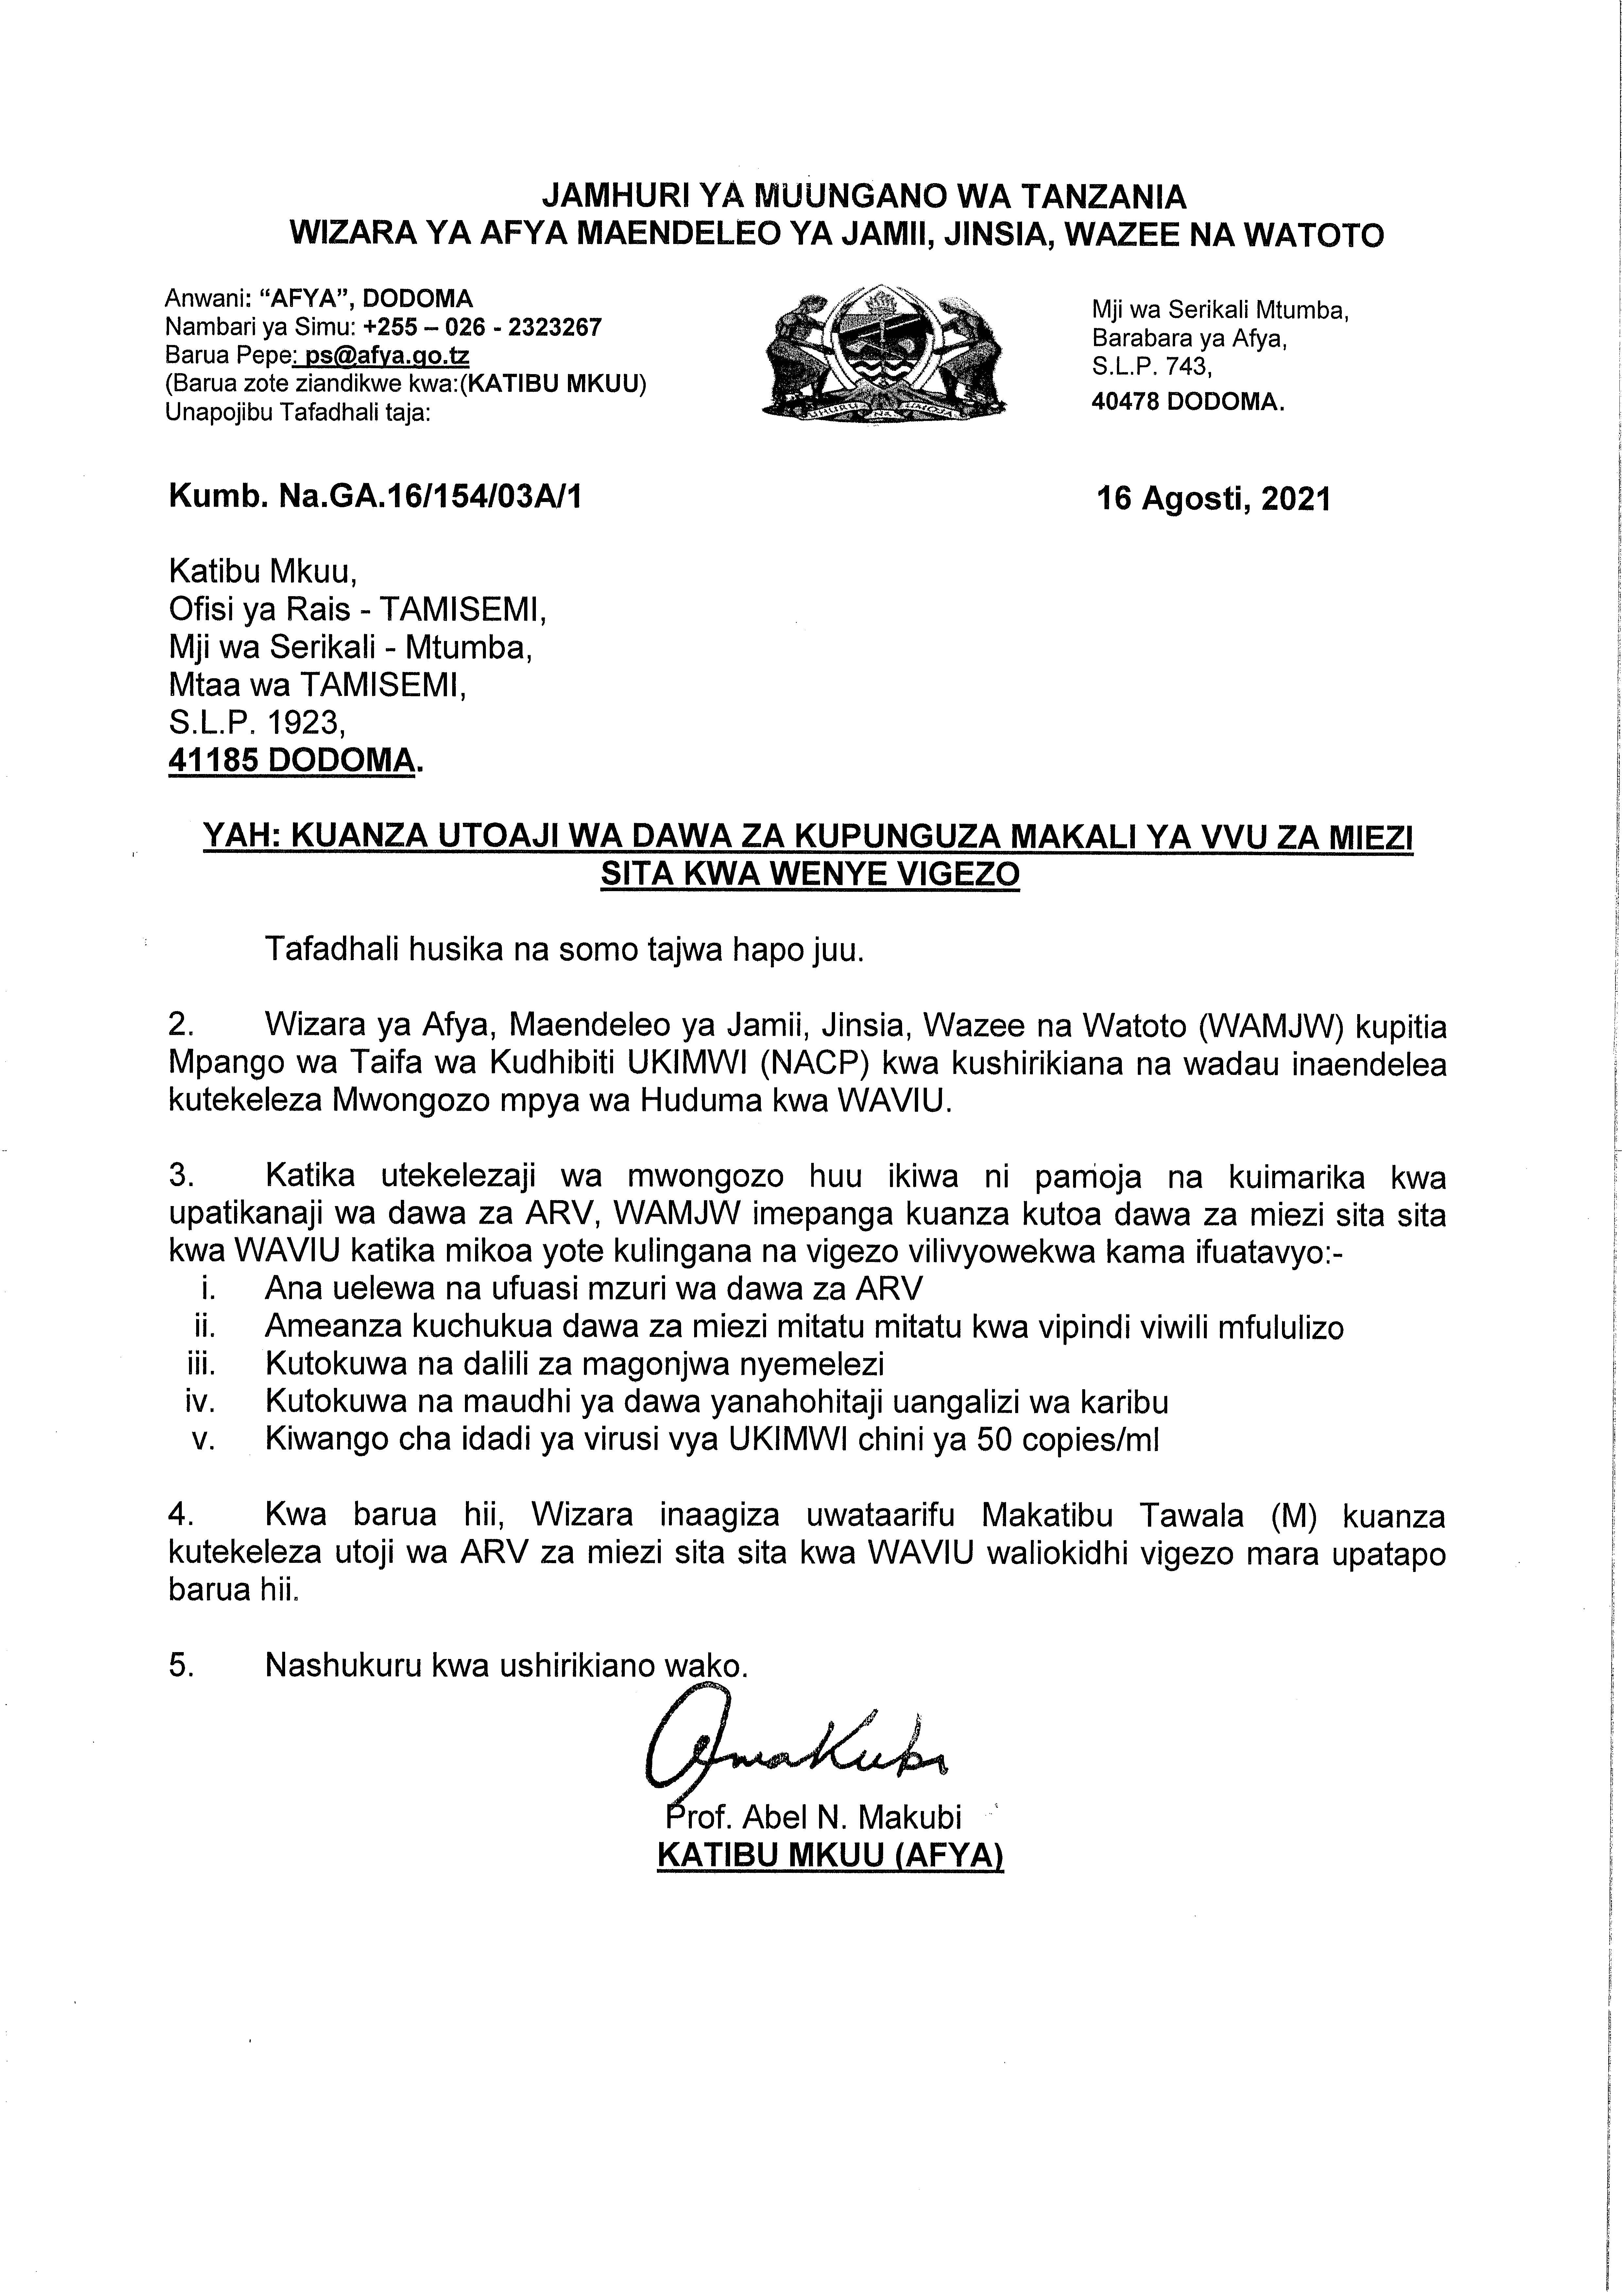 The circular that Tanzania’s Ministry of Health released in August 2021.